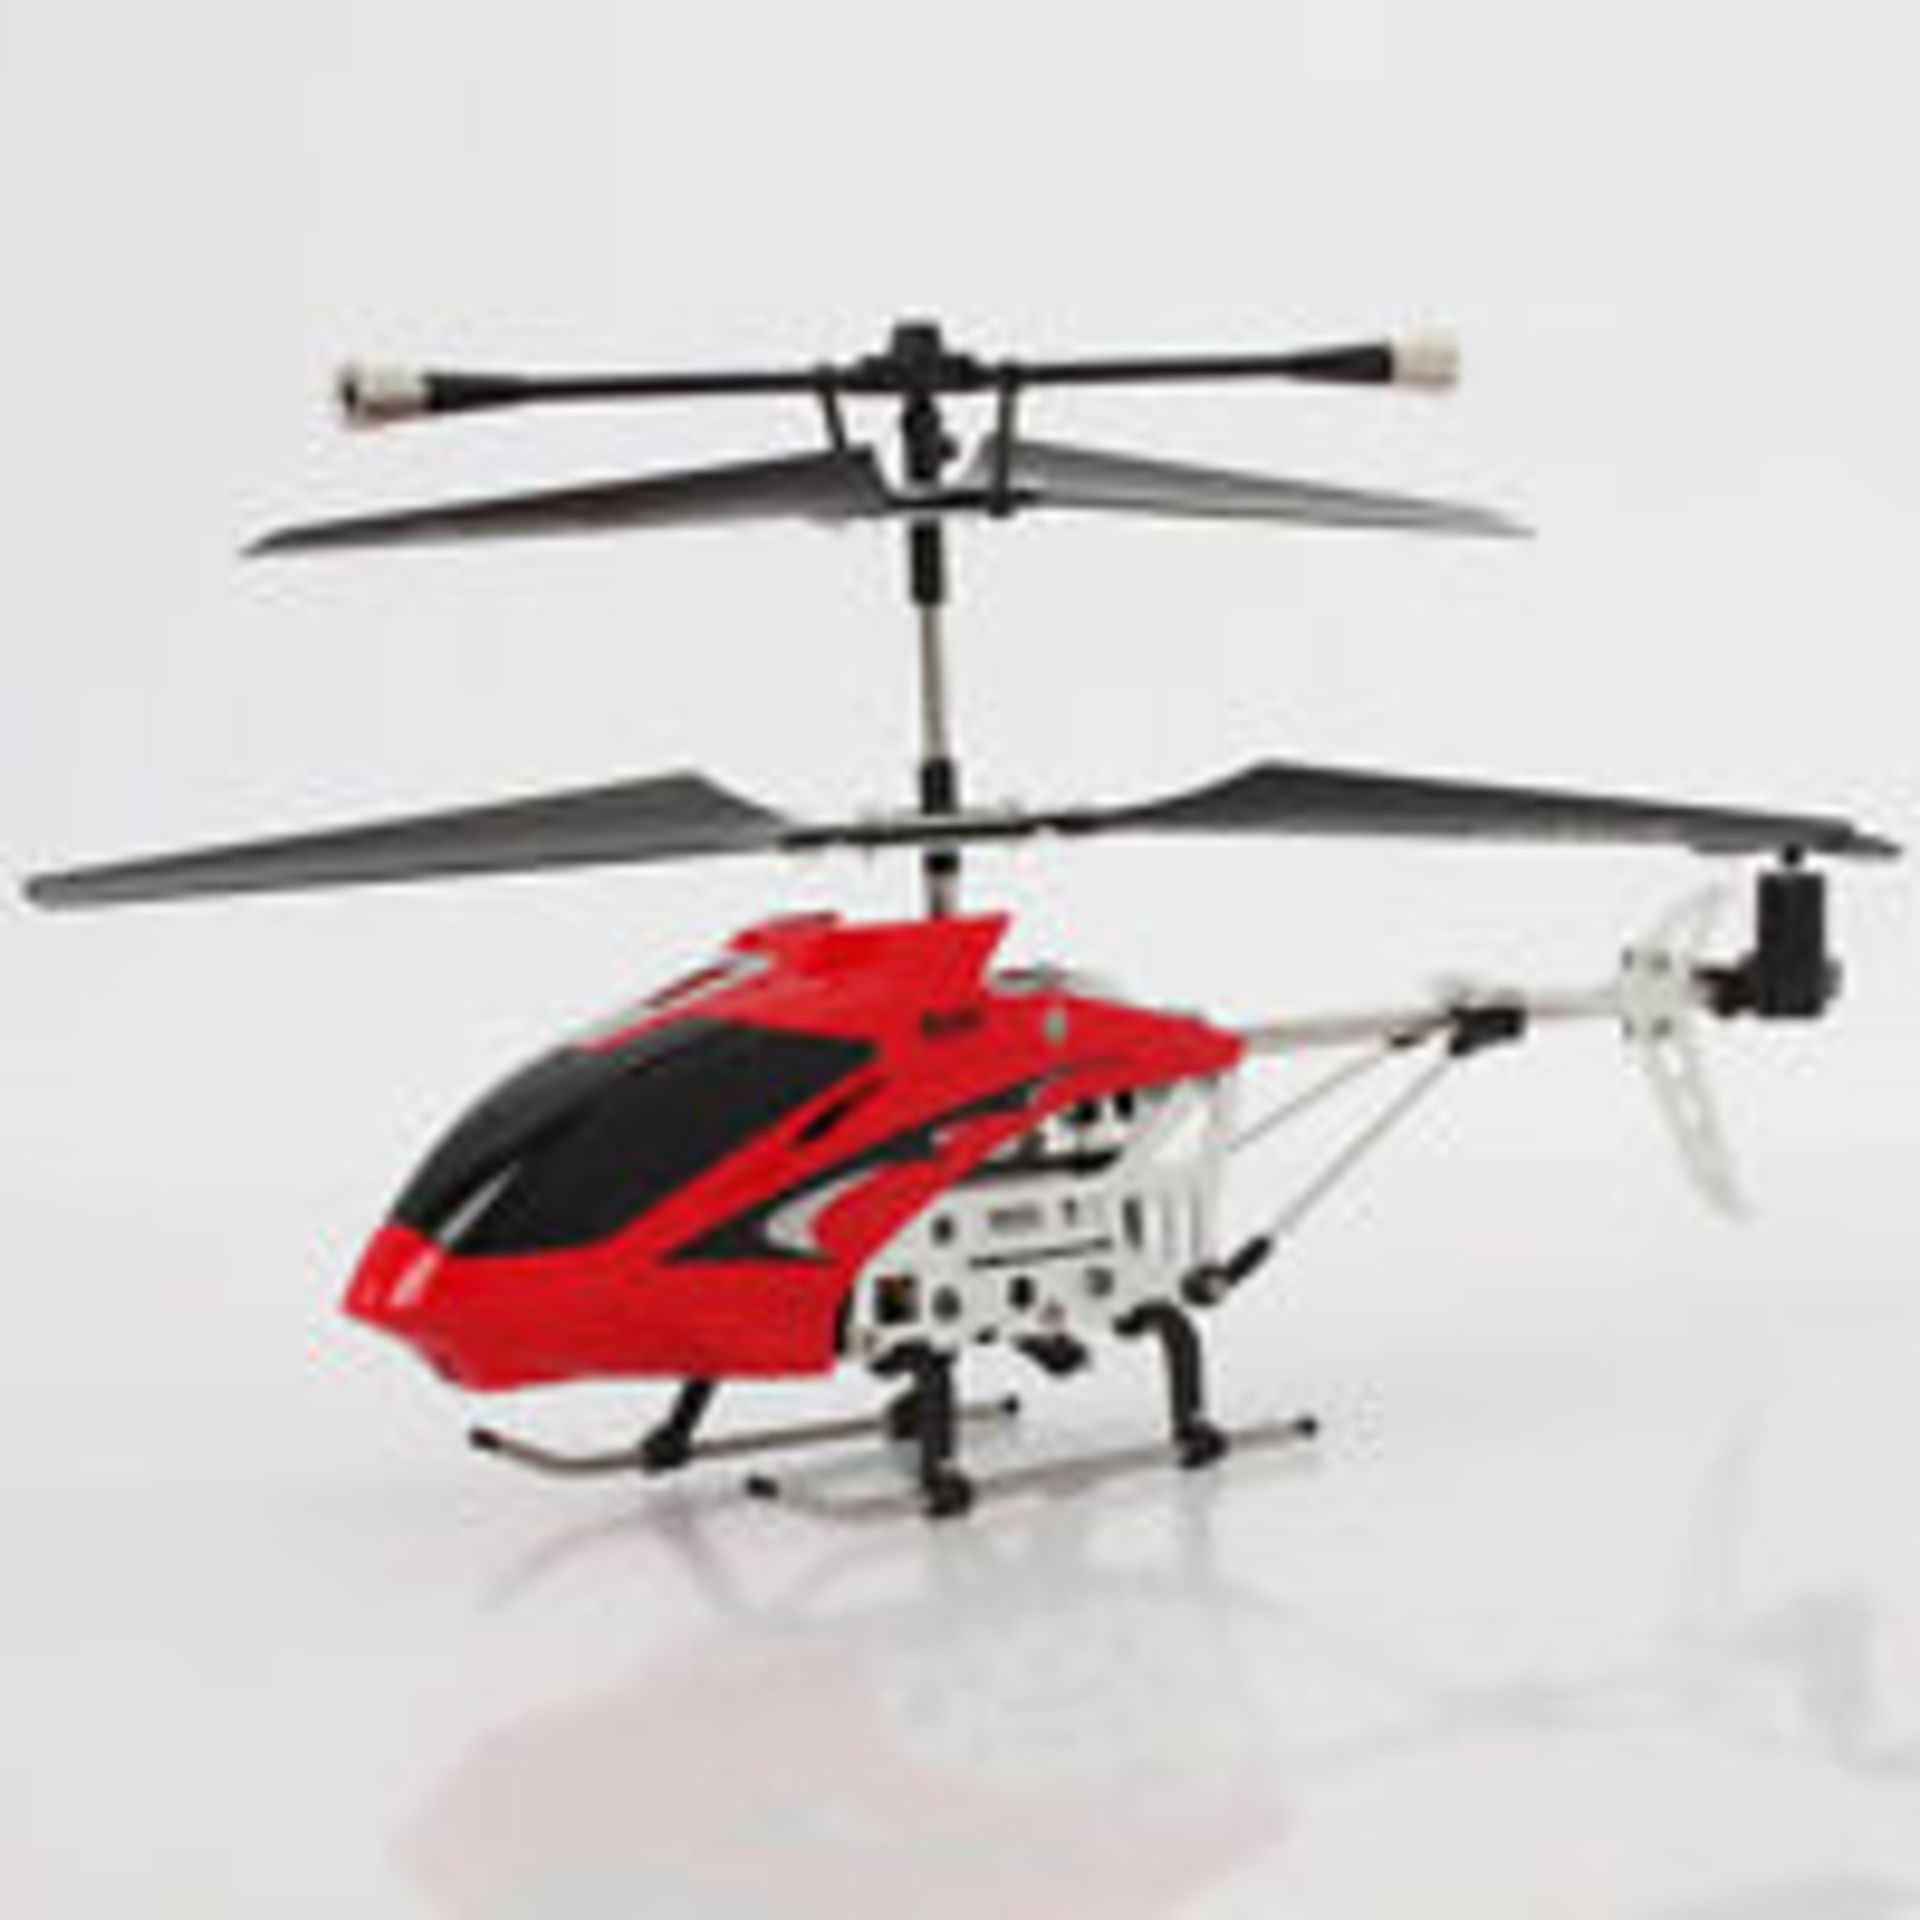 V *TRADE QTY* Brand New Infra-Red 3.5 Channel Flying Camera Spy Helicopter - Built In Video And